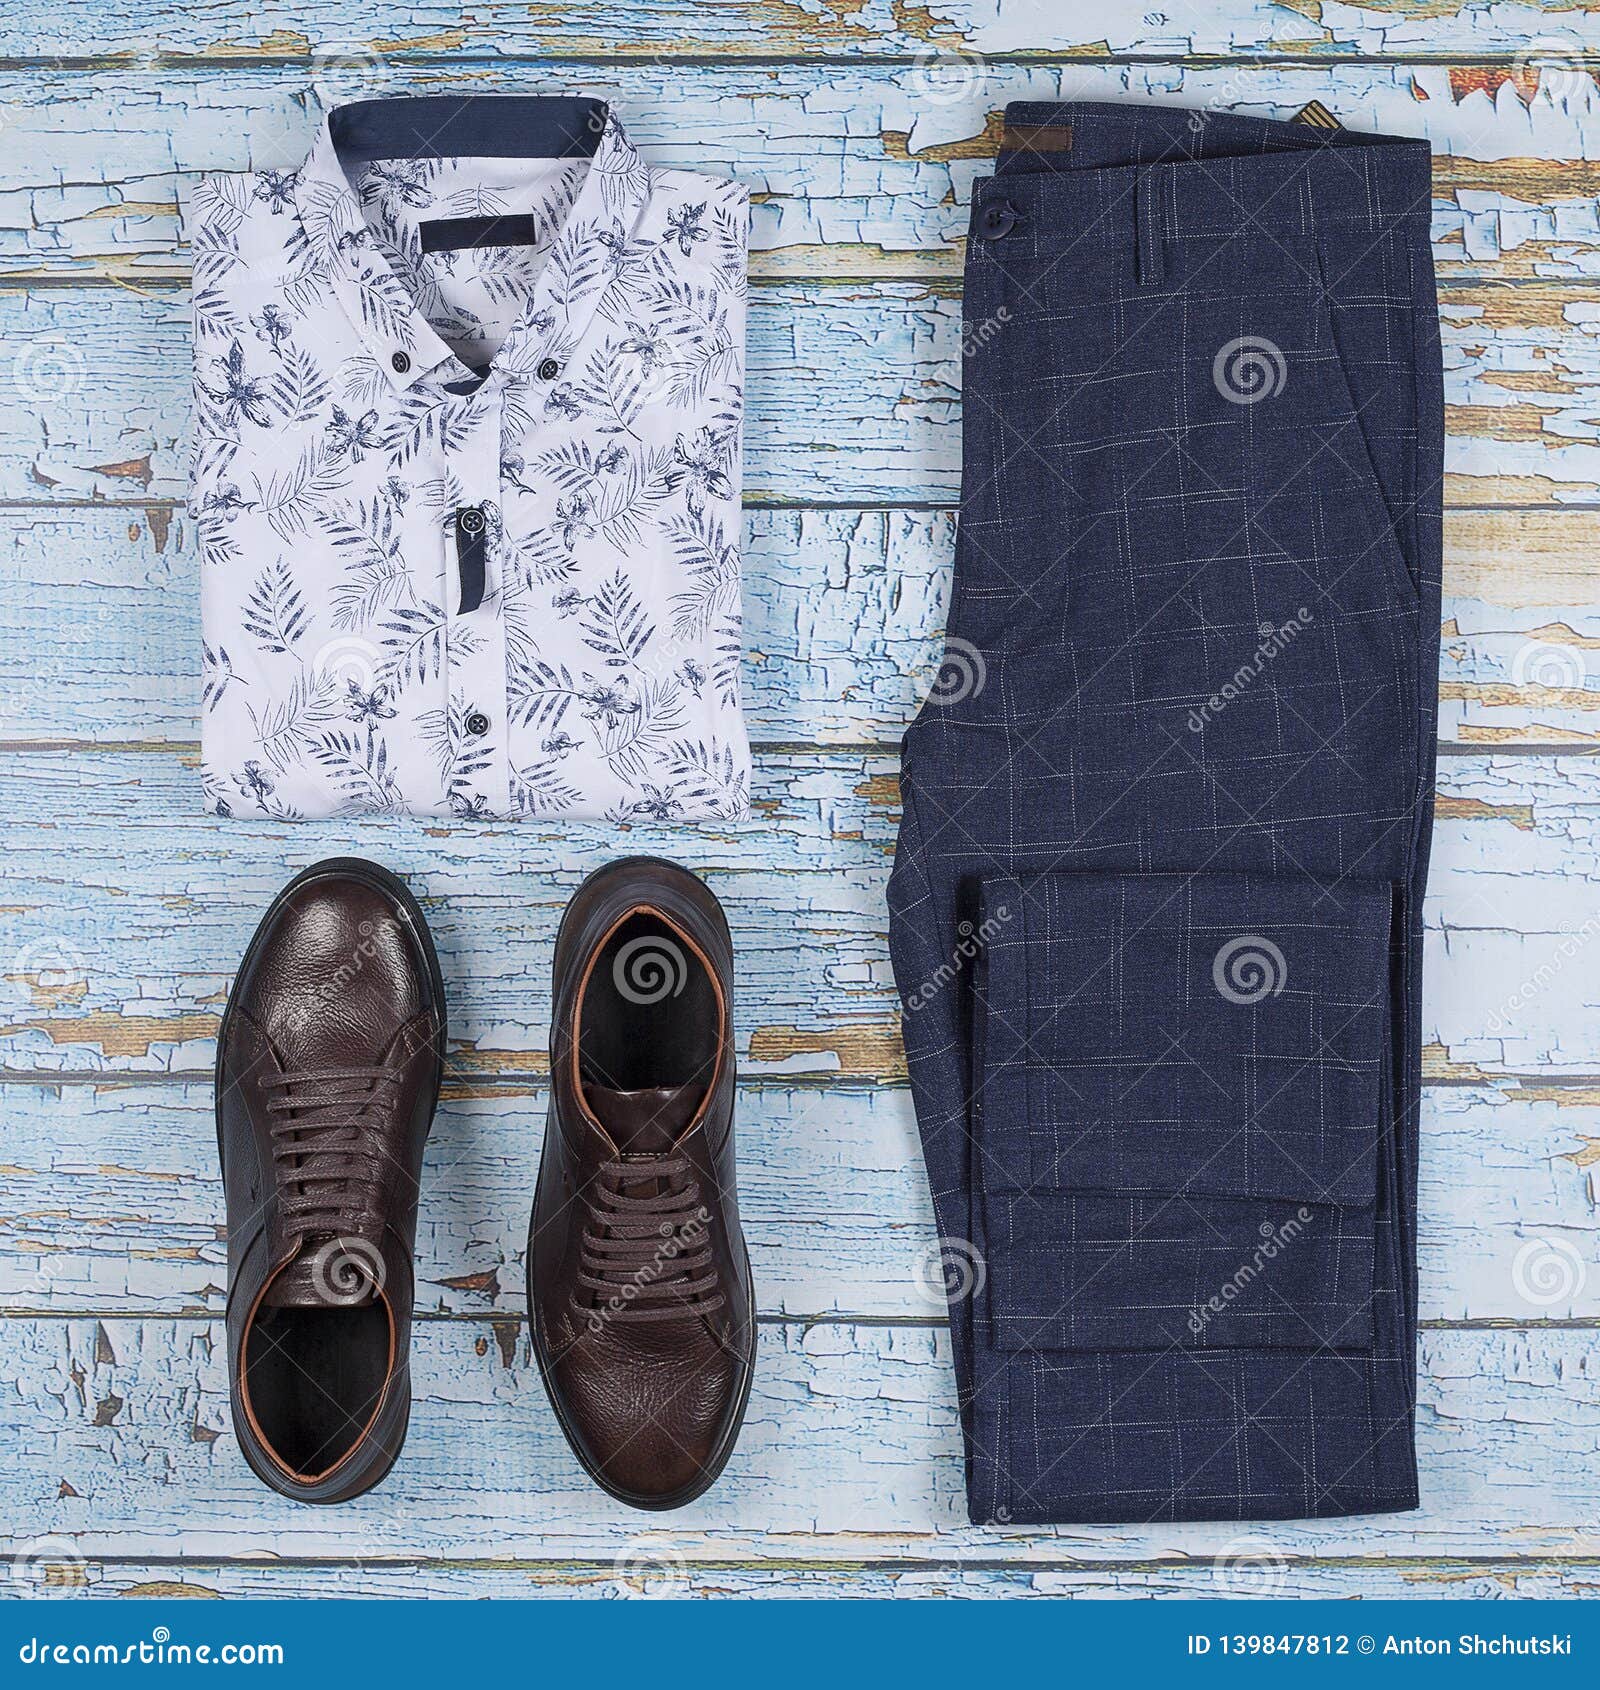 What Trousers To Wear With Every Shoe Colour  FailSafe Combos For Men